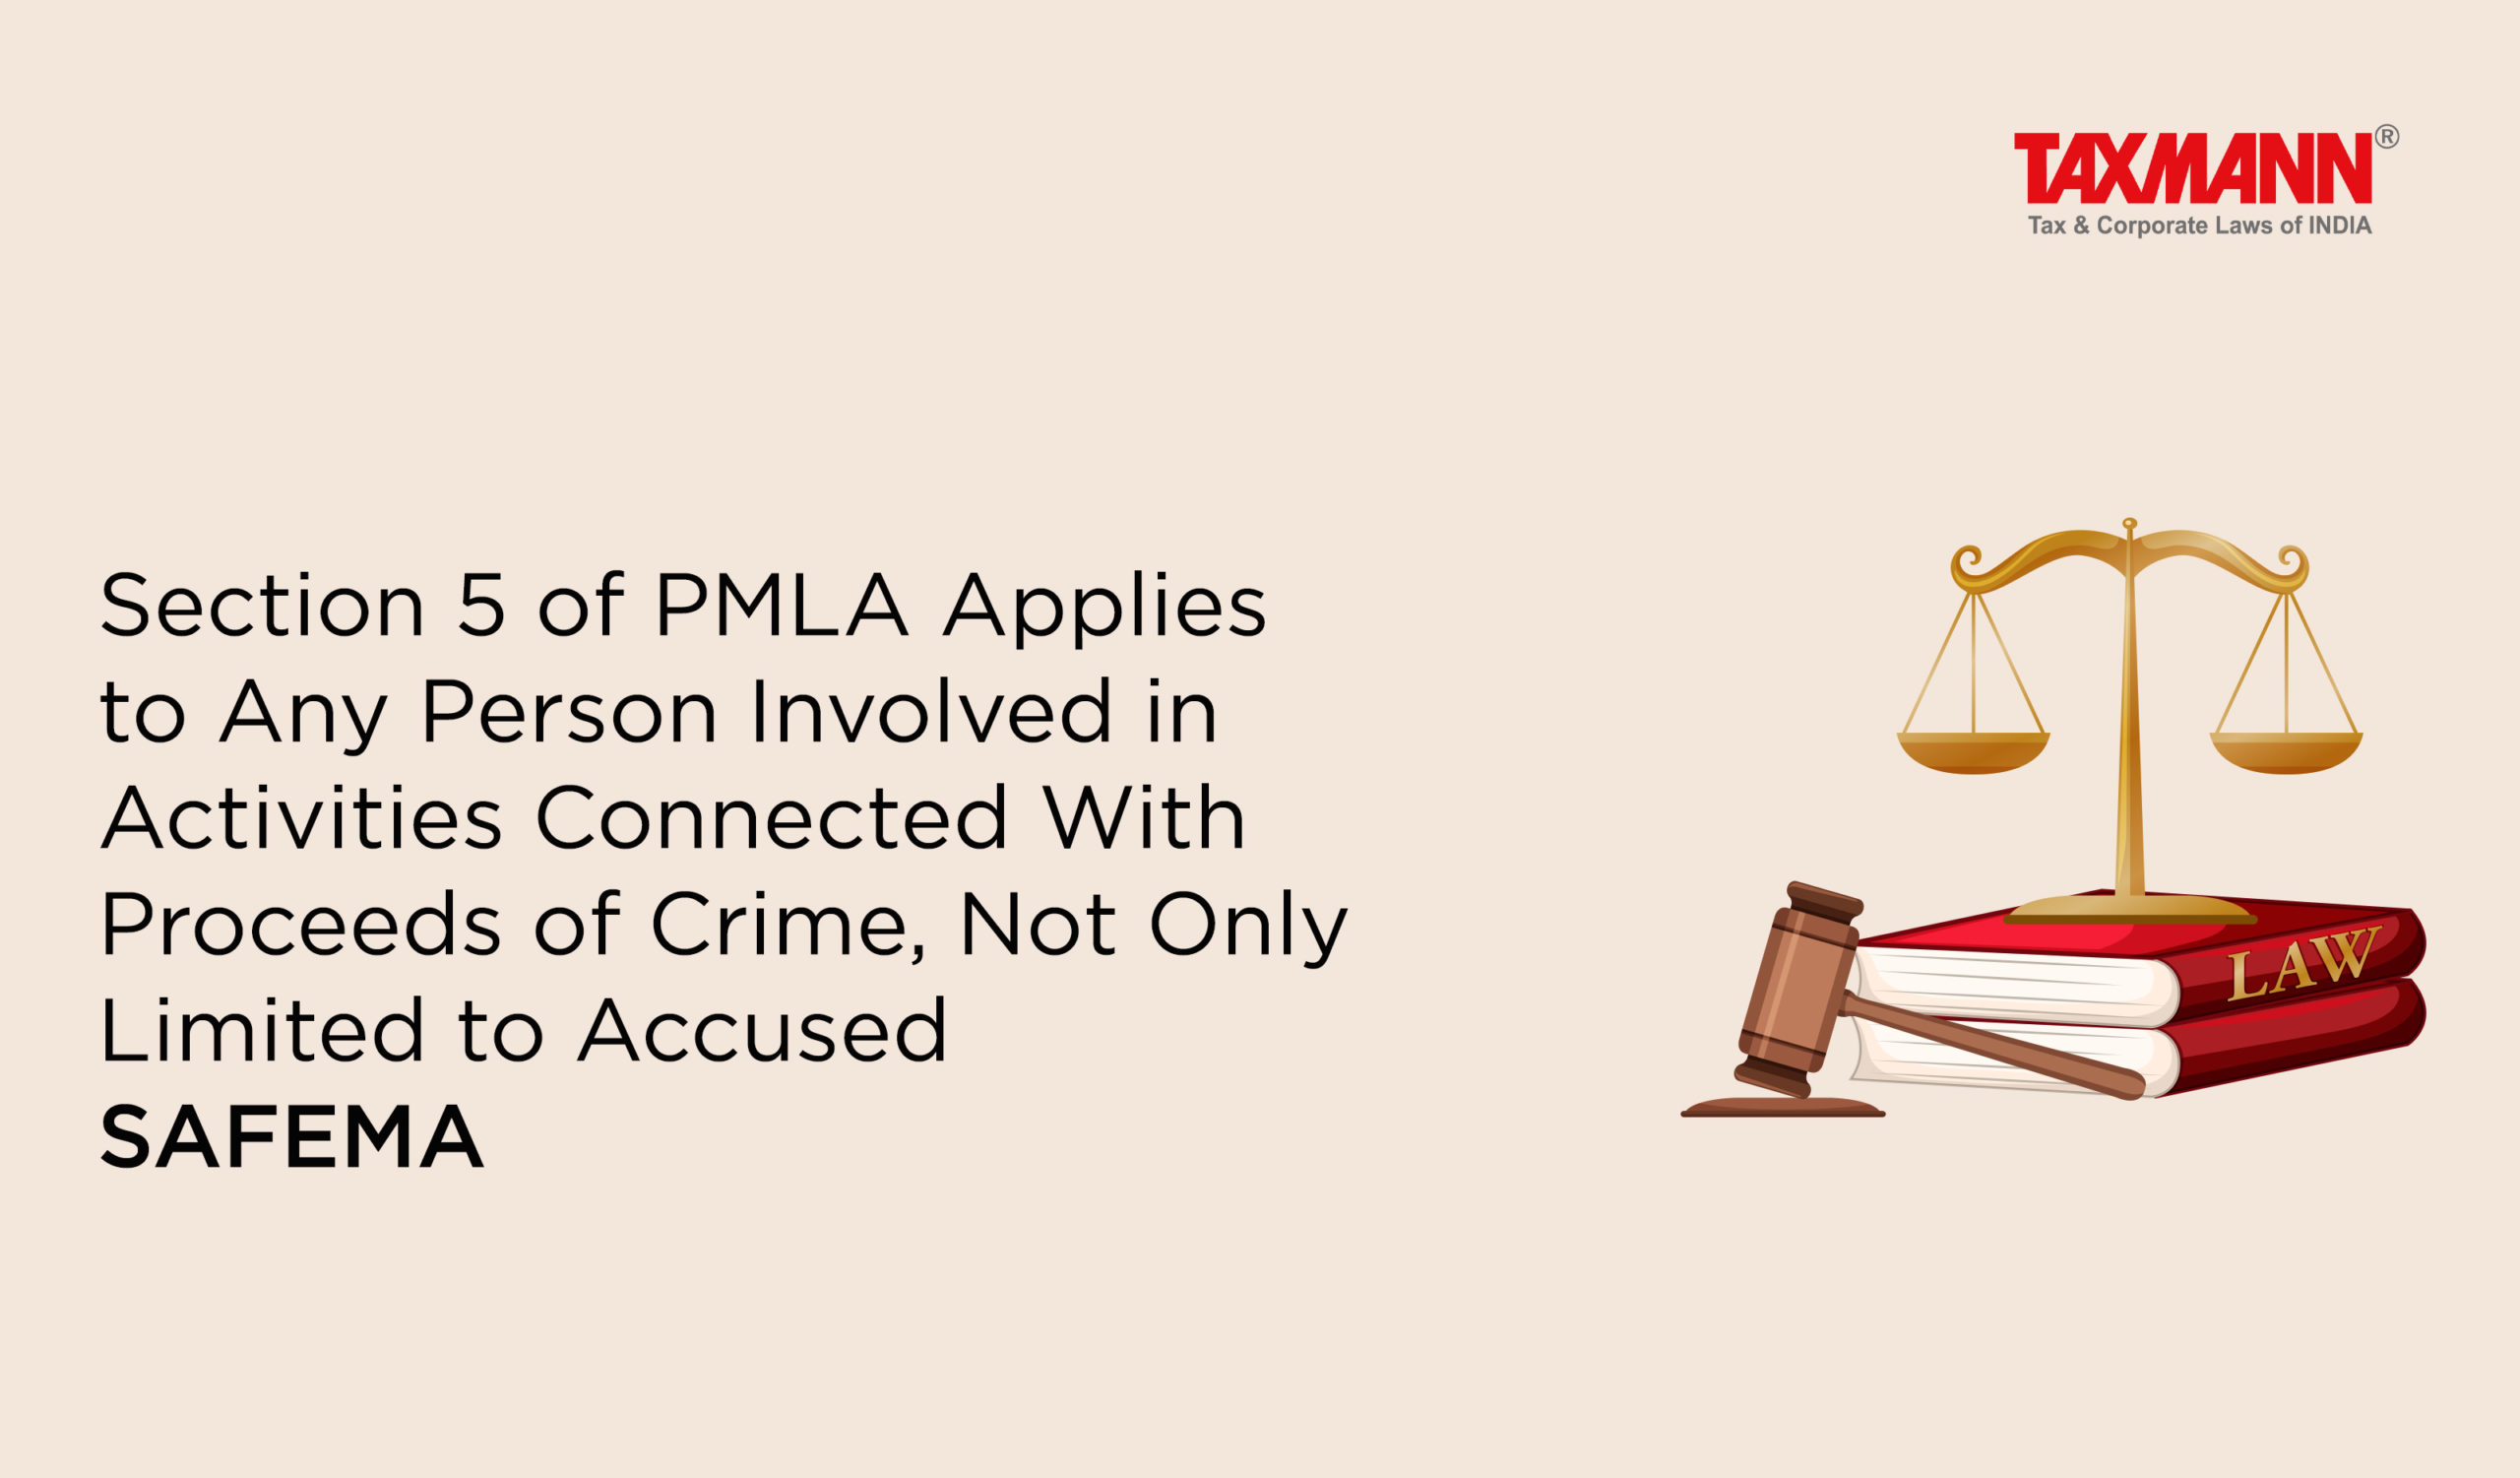 Section 5 of PMLA; proceeds of crime